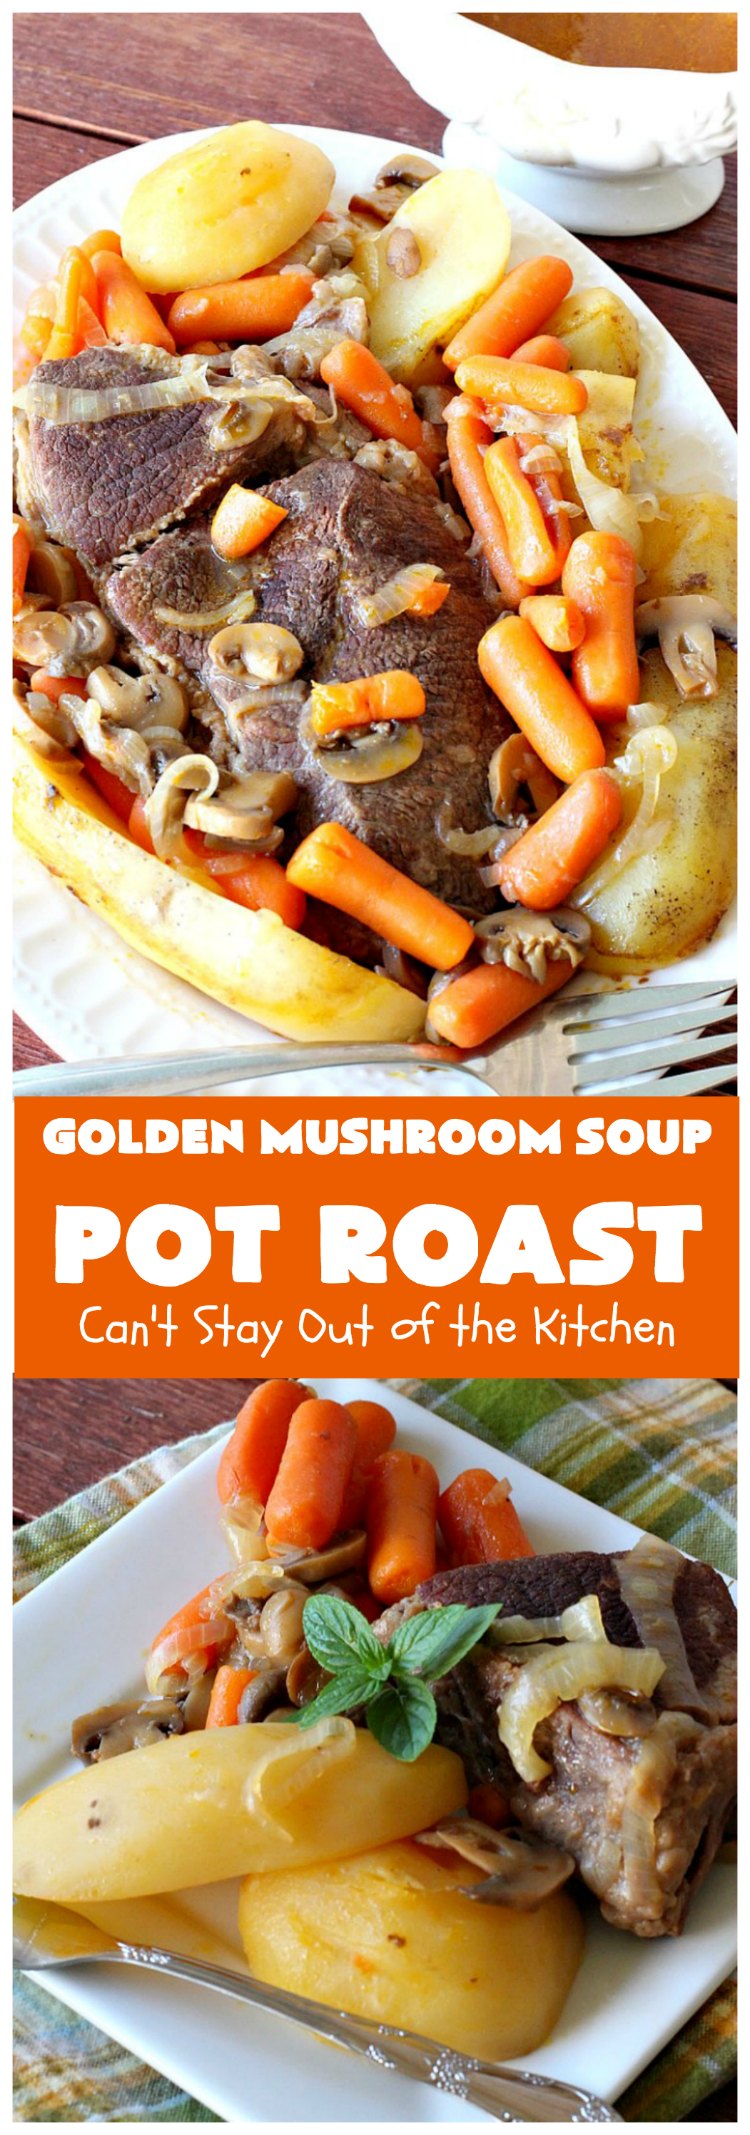 Golden Mushroom Soup Pot Roast | Can't Stay Out of the Kitchen | this #PotRoast #recipe has always been a family favorite. It uses a can of #CampbellsGoldenMushroomSoup which exponentially amps up the flavors & makes this a comfort food entree everyone loves. #beef #BeefPotRoast #potatoes #carrots #GoldenMushroomSoup  #GoldenMushroomSoupPotRoast